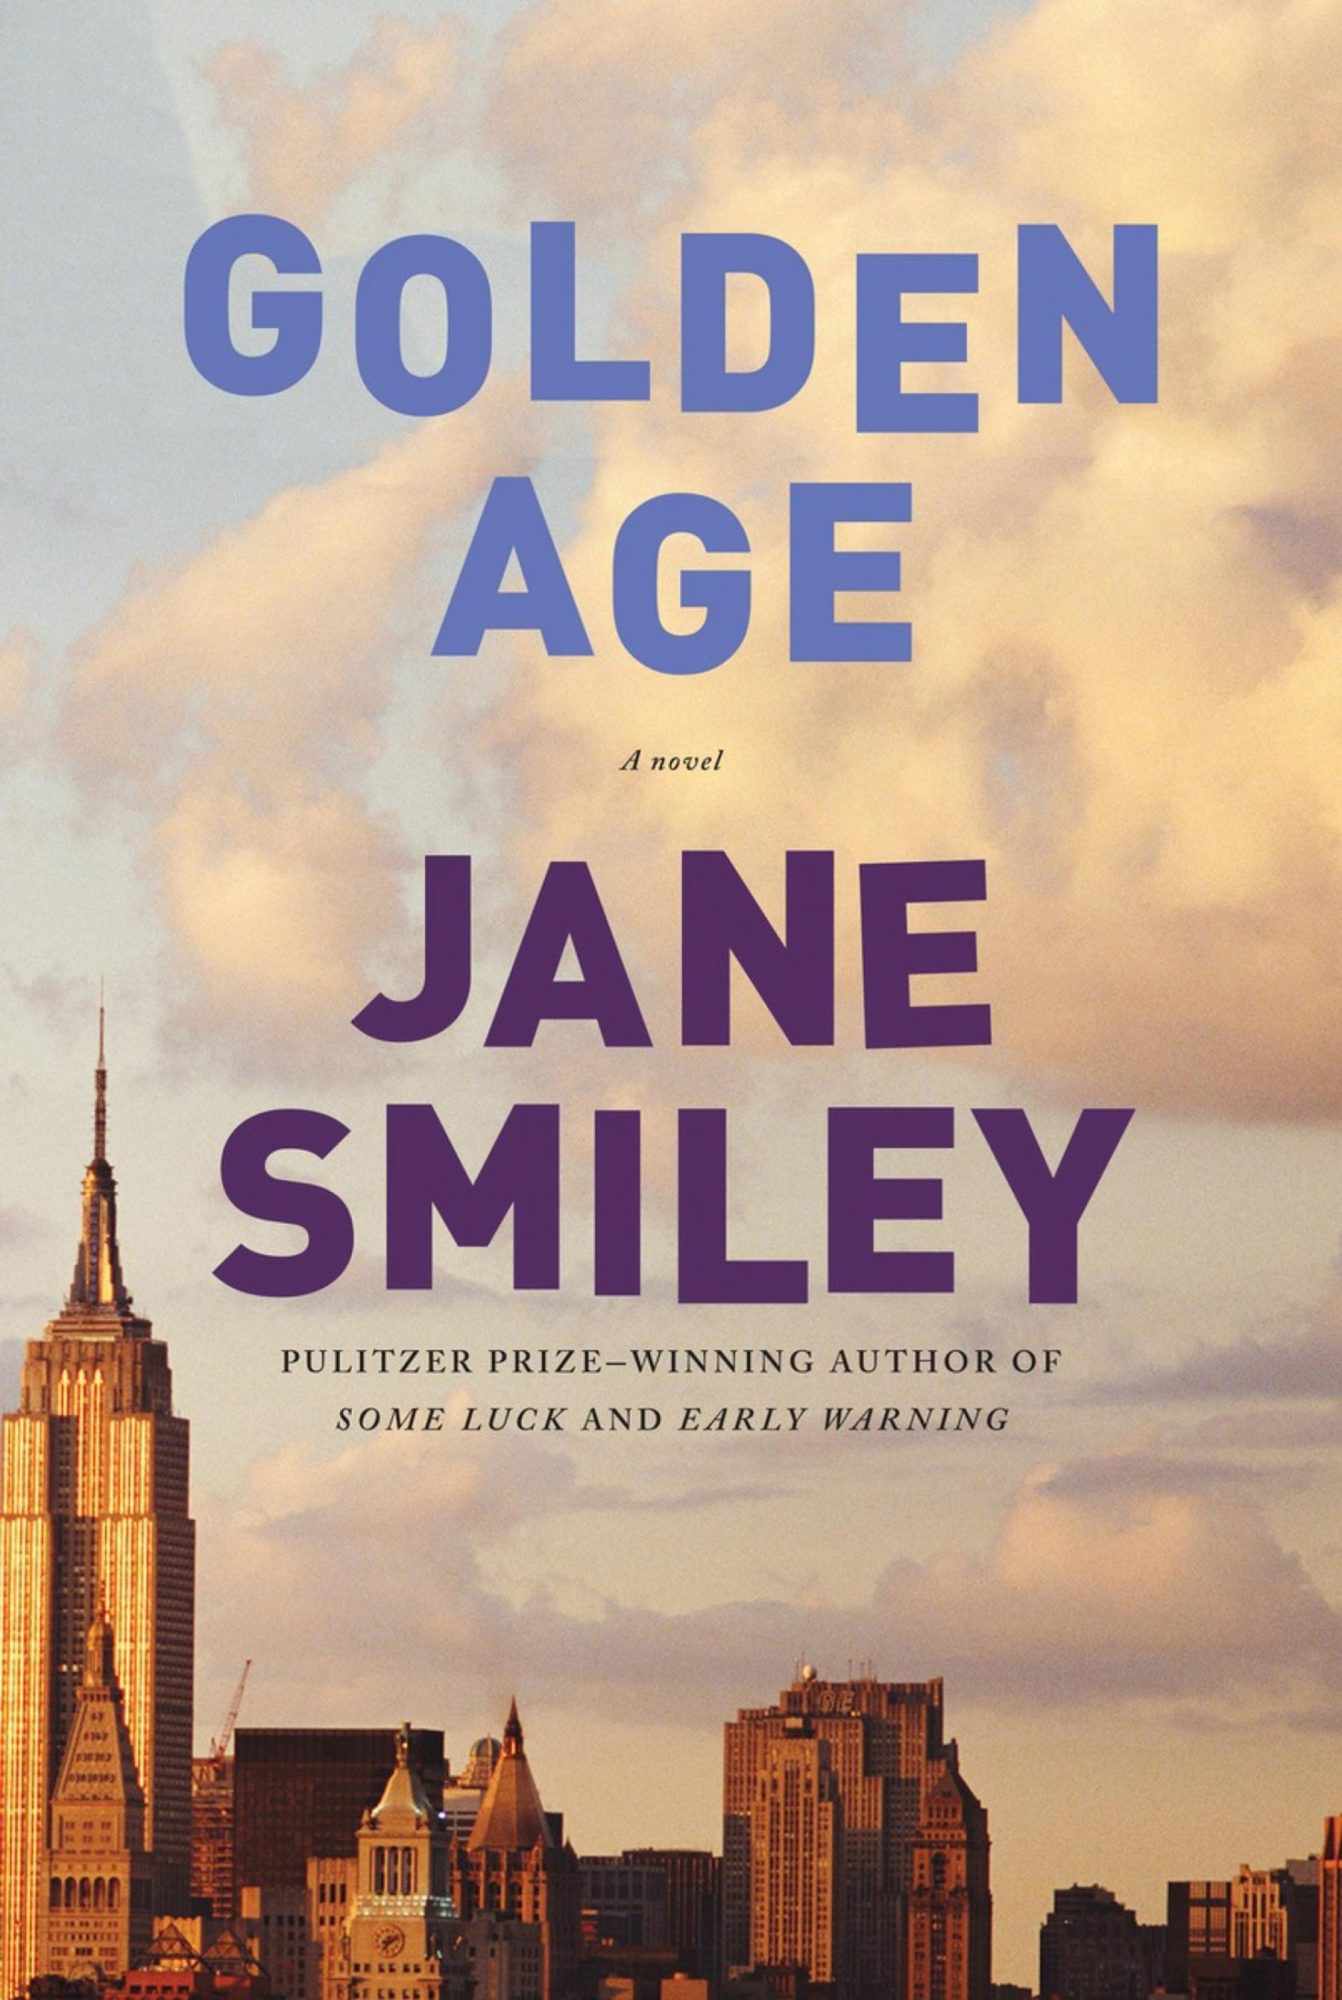 Golden Age&nbsp;by Jane Smiley